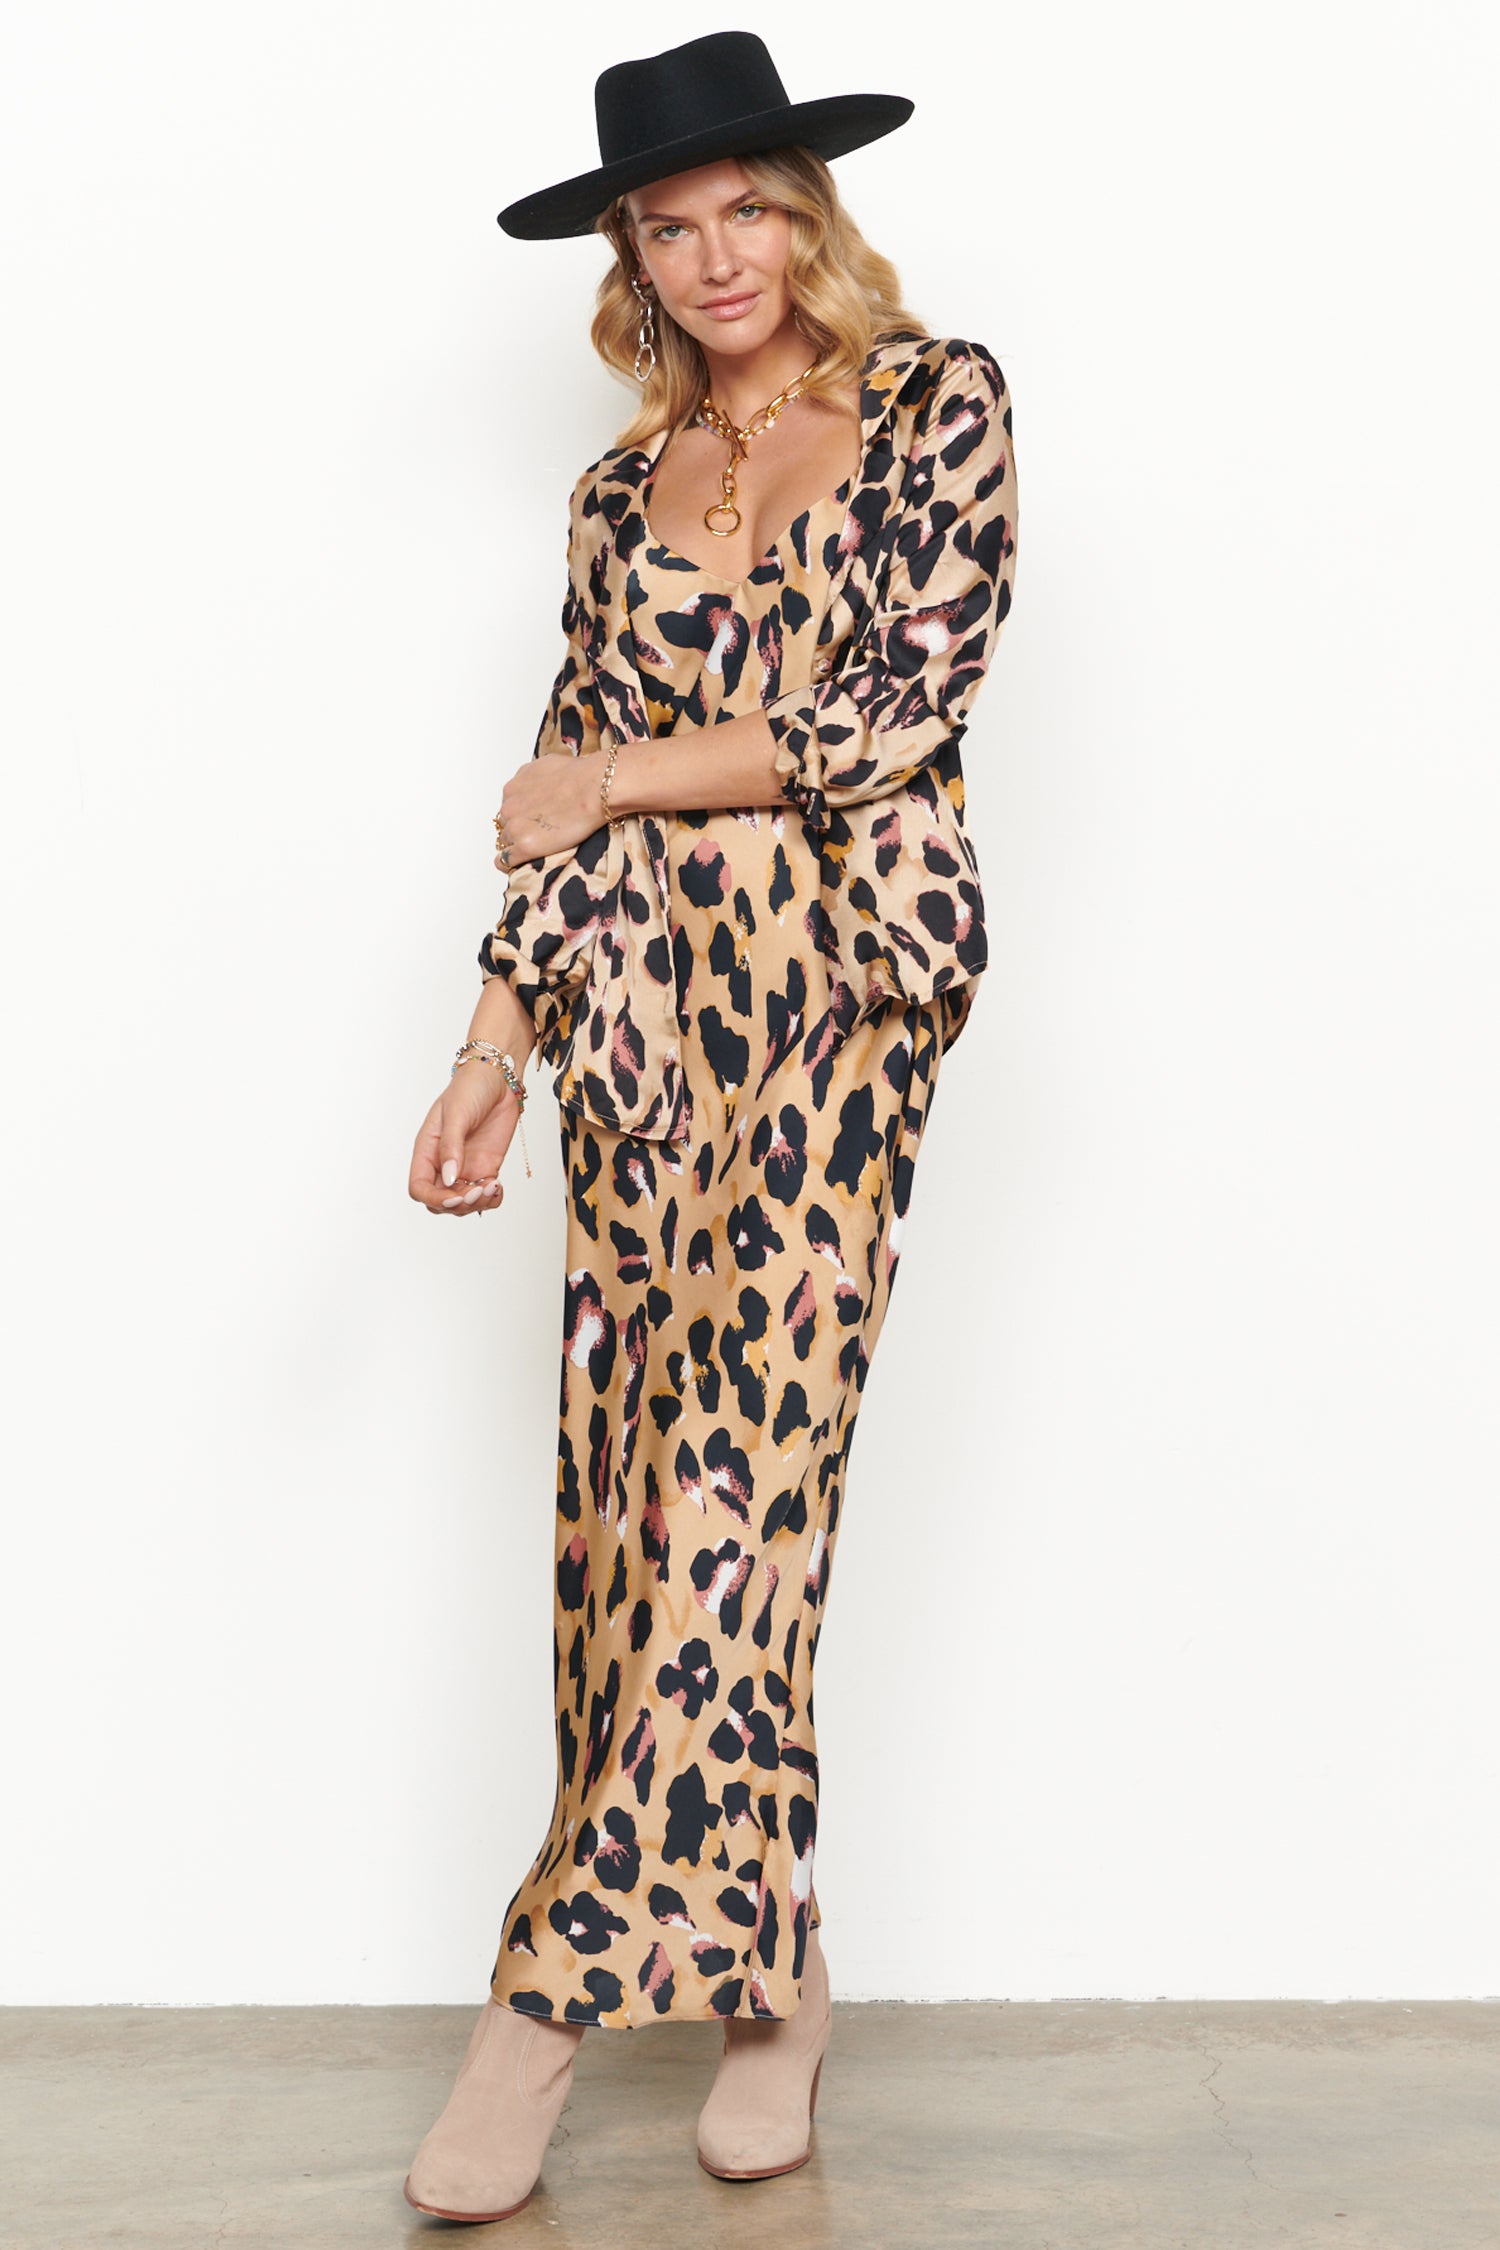 Model wearing Brown Leopard Camille Slip Dress standing facing the camera